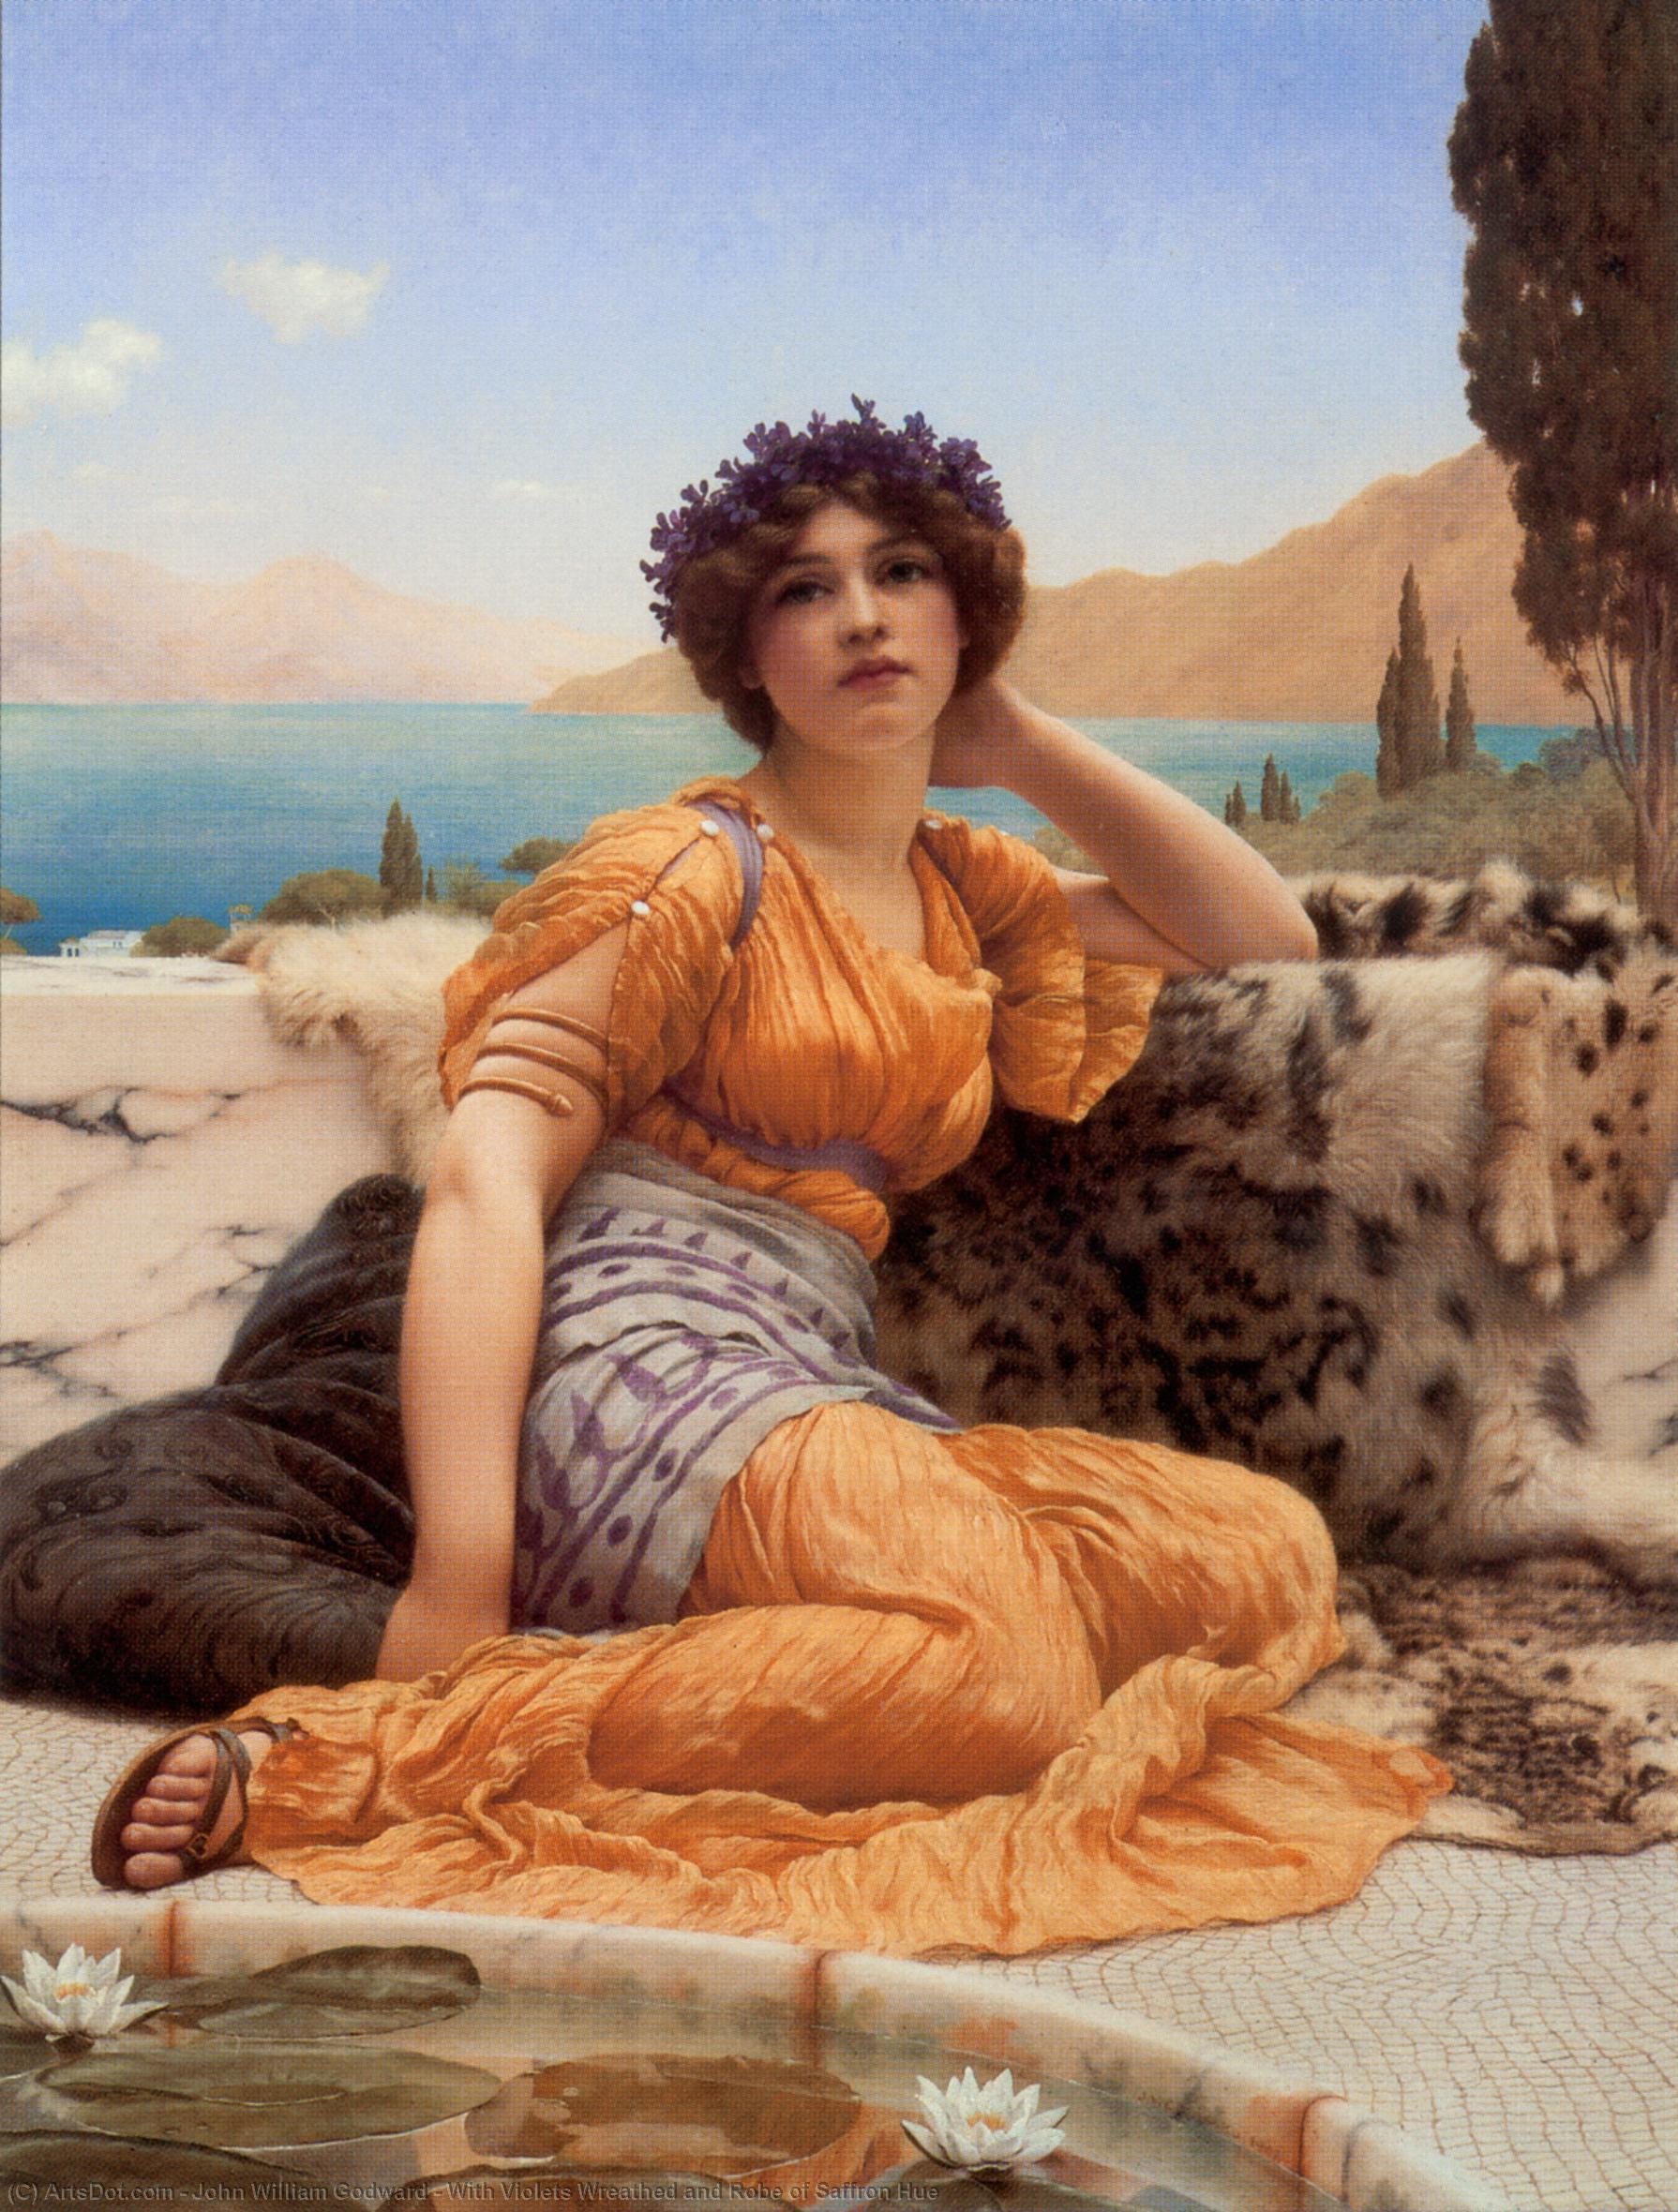 WikiOO.org - 백과 사전 - 회화, 삽화 John William Godward - With Violets Wreathed and Robe of Saffron Hue